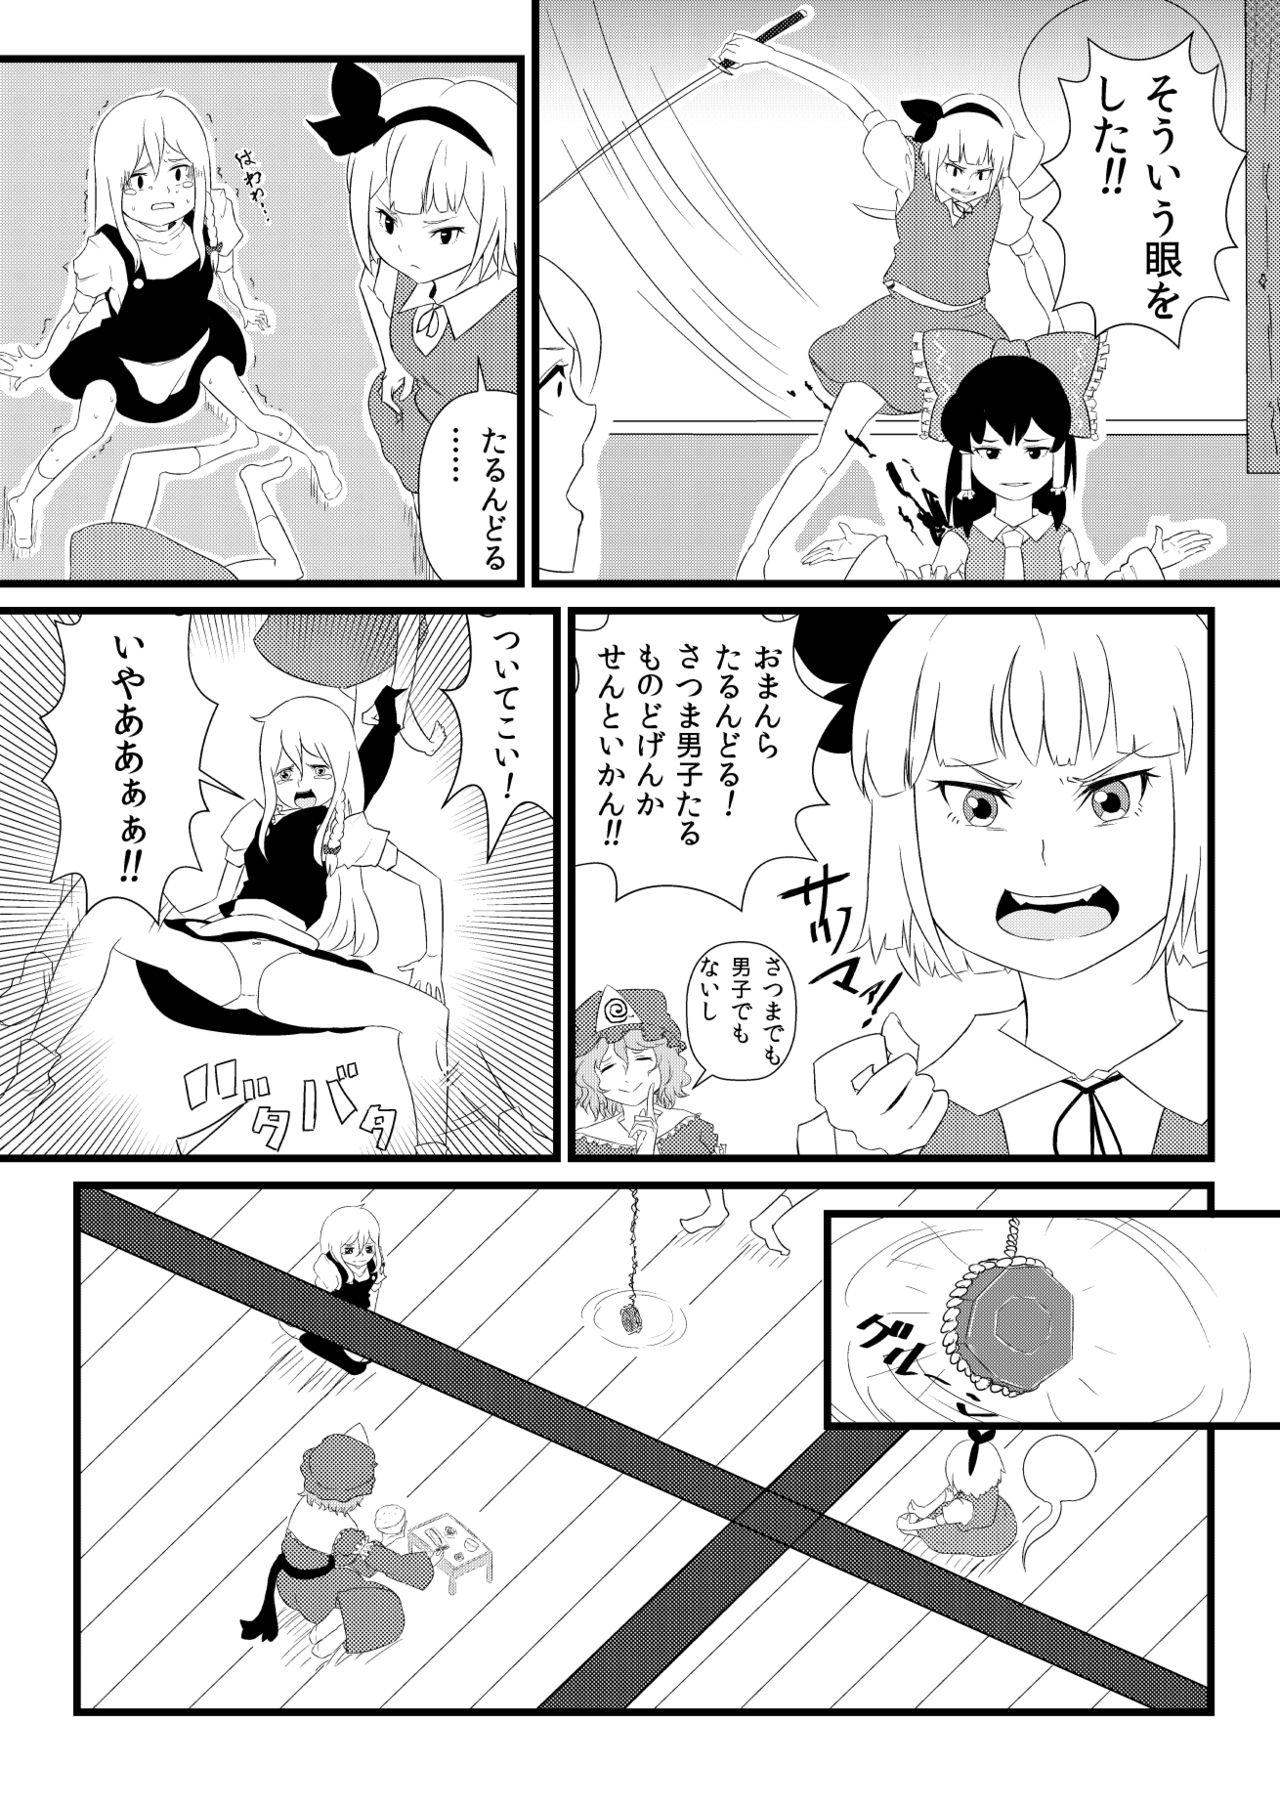 Double Penetration 東方板としあき合同誌5 - Touhou project Dirty Talk - Page 3